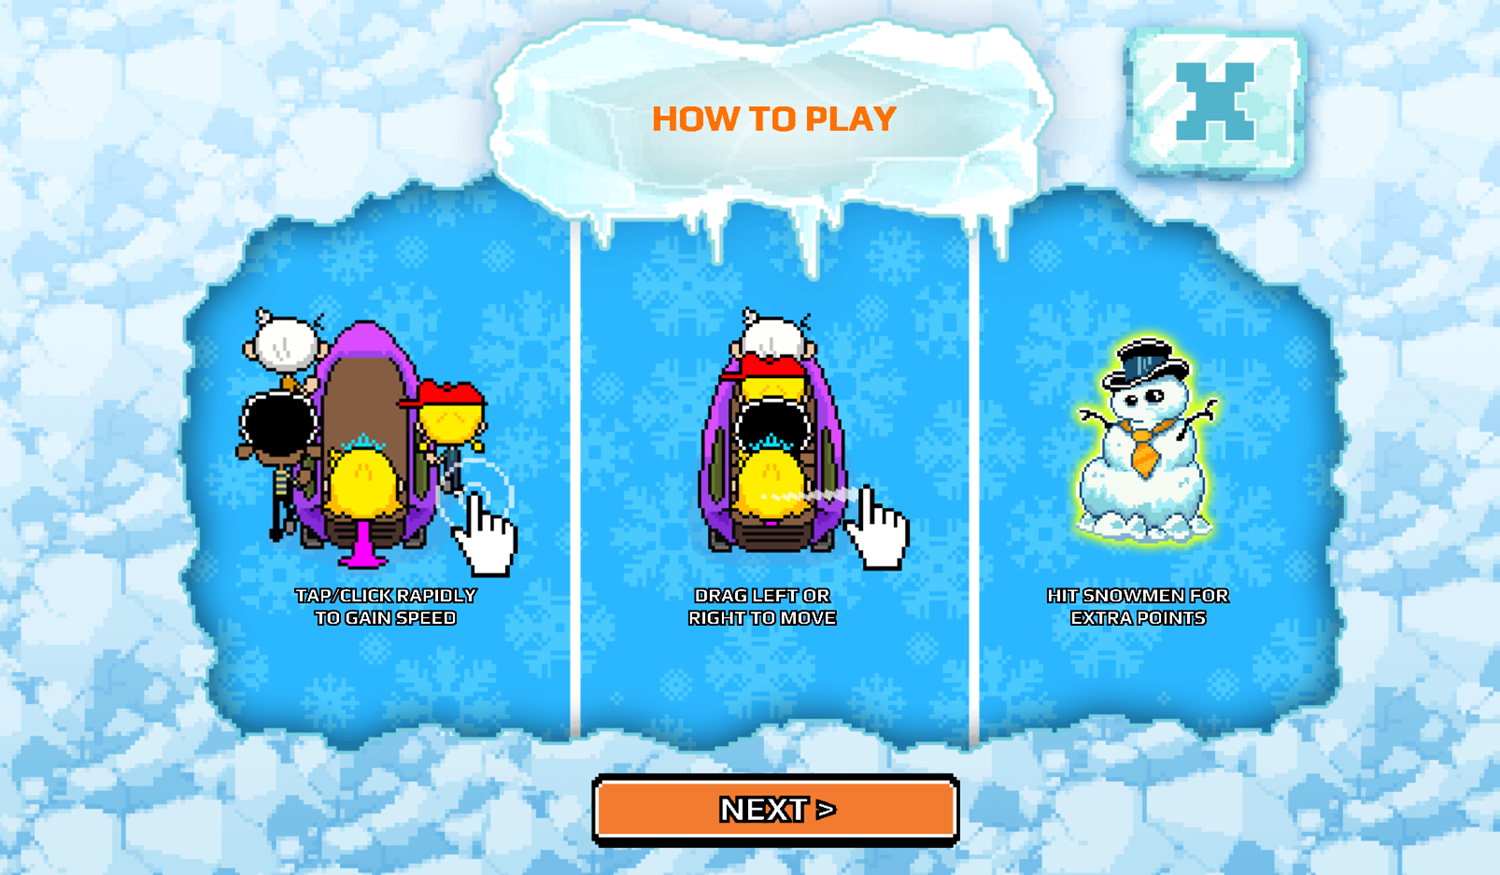 Nick Champions of the Chill 2 Game Loud Loud Loud Sled How To Play Screenshot.